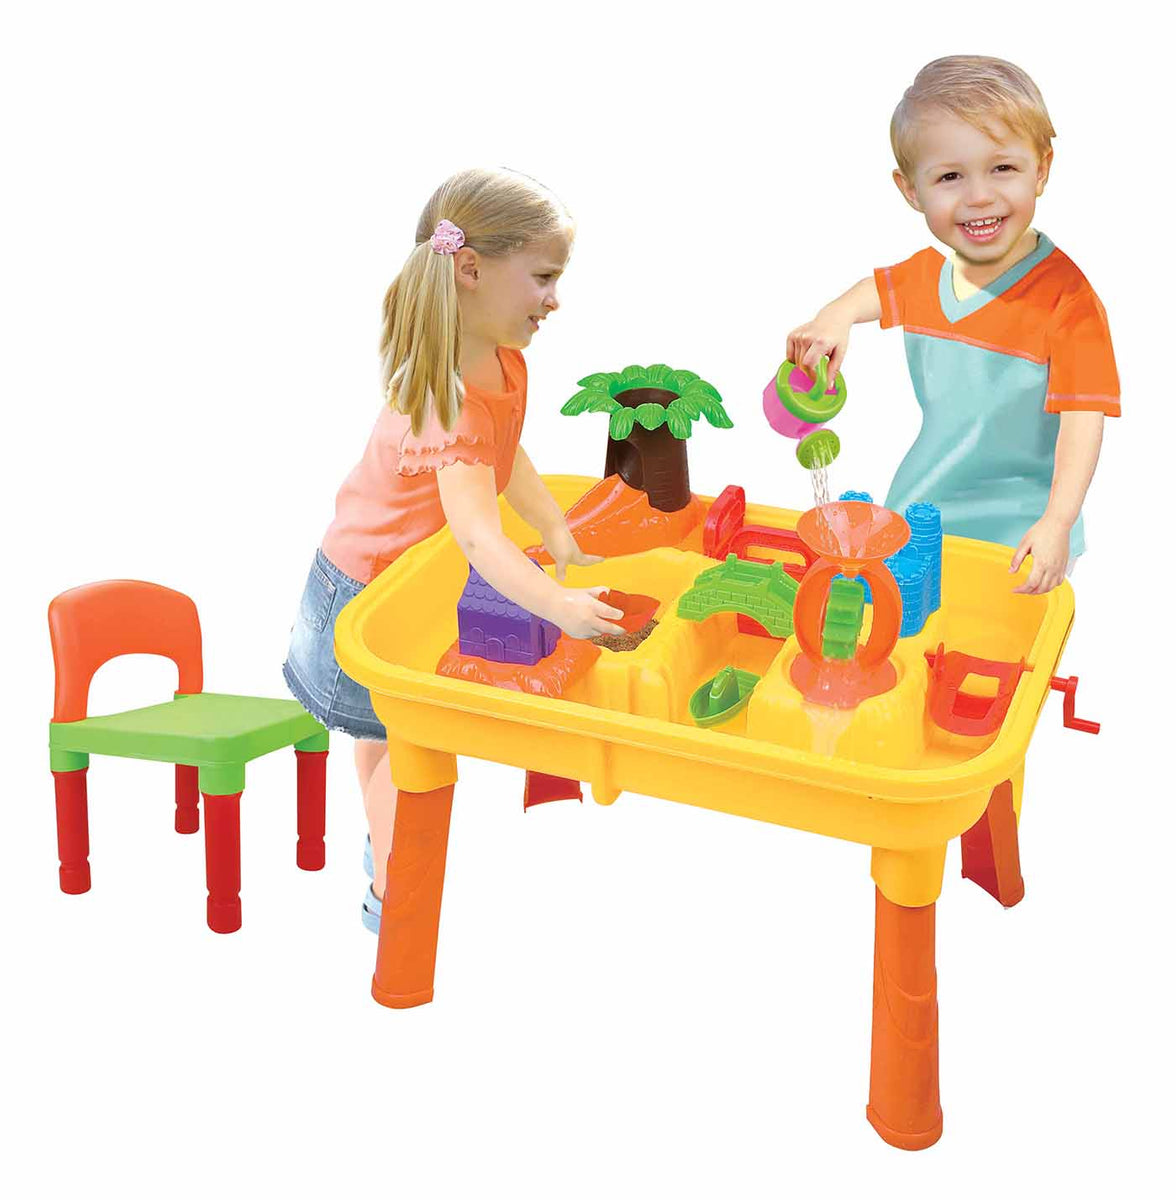 Children playing with the sand & water table.